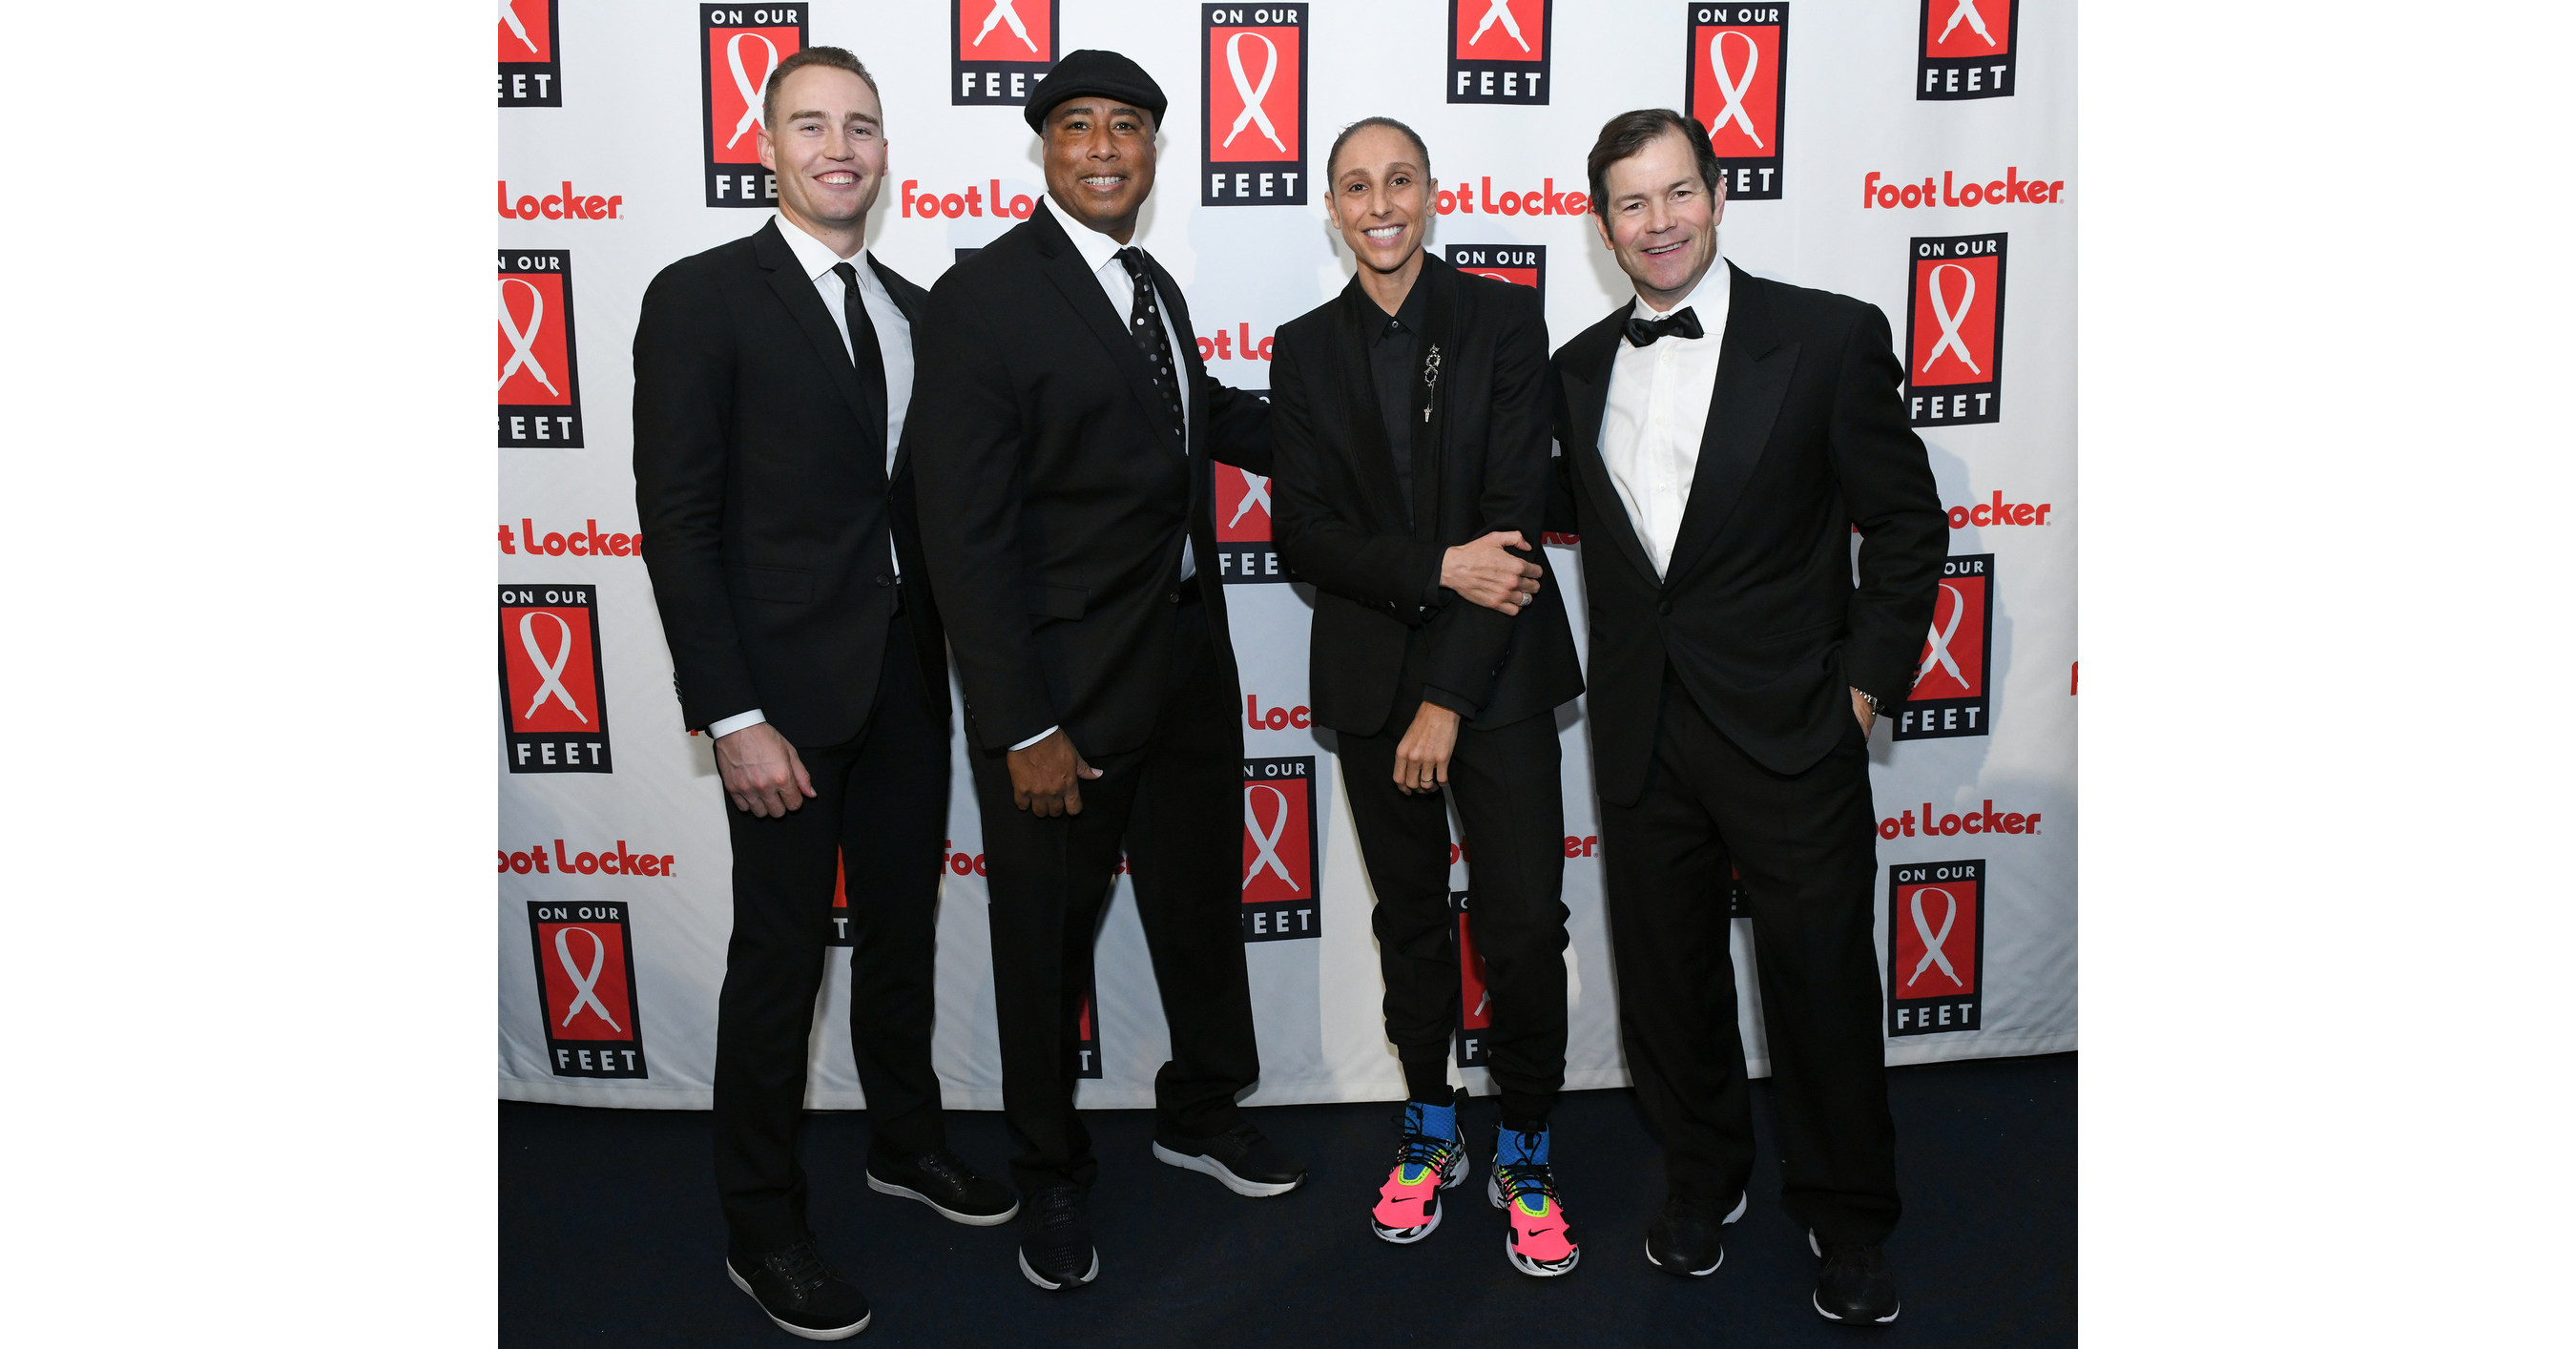 Foot Locker Foundation Unites Athletic Industry for 18th Annual On Our